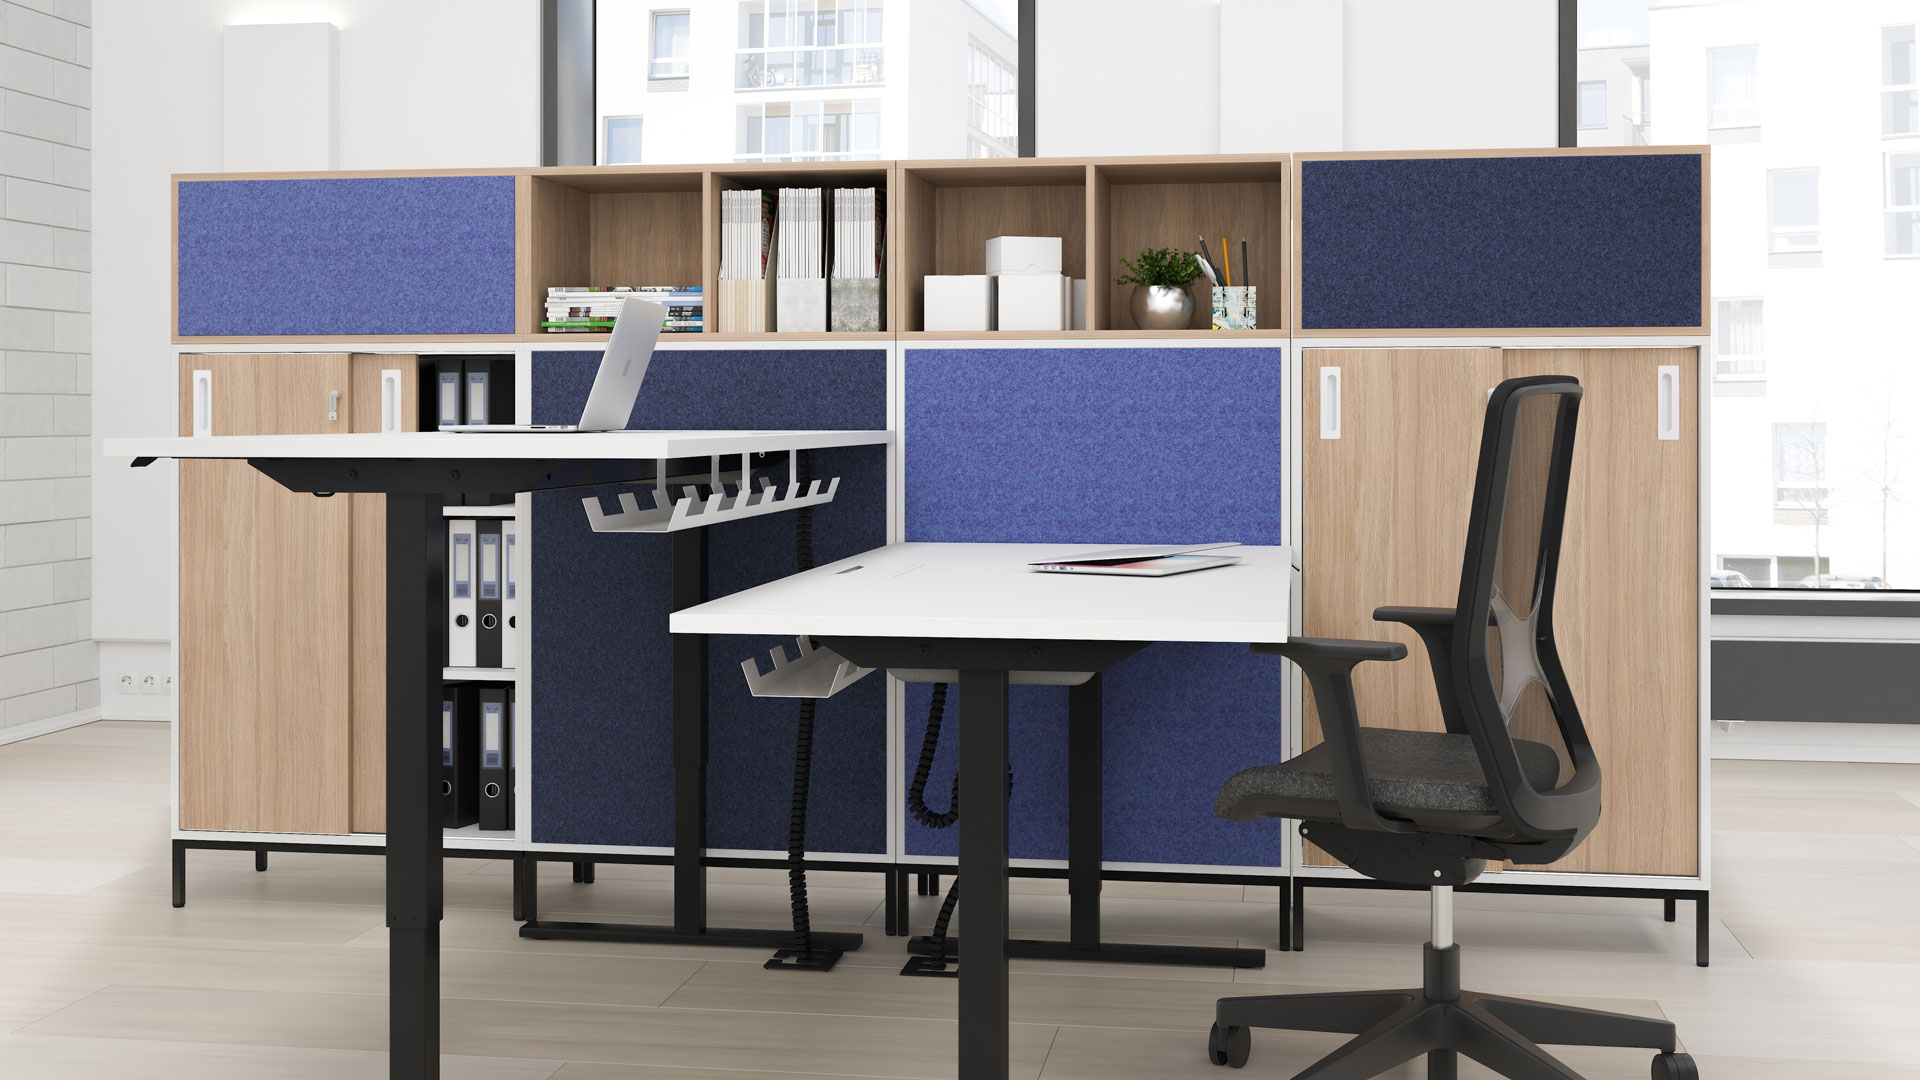 Use fabric back panels to bring colour and texture to dividers